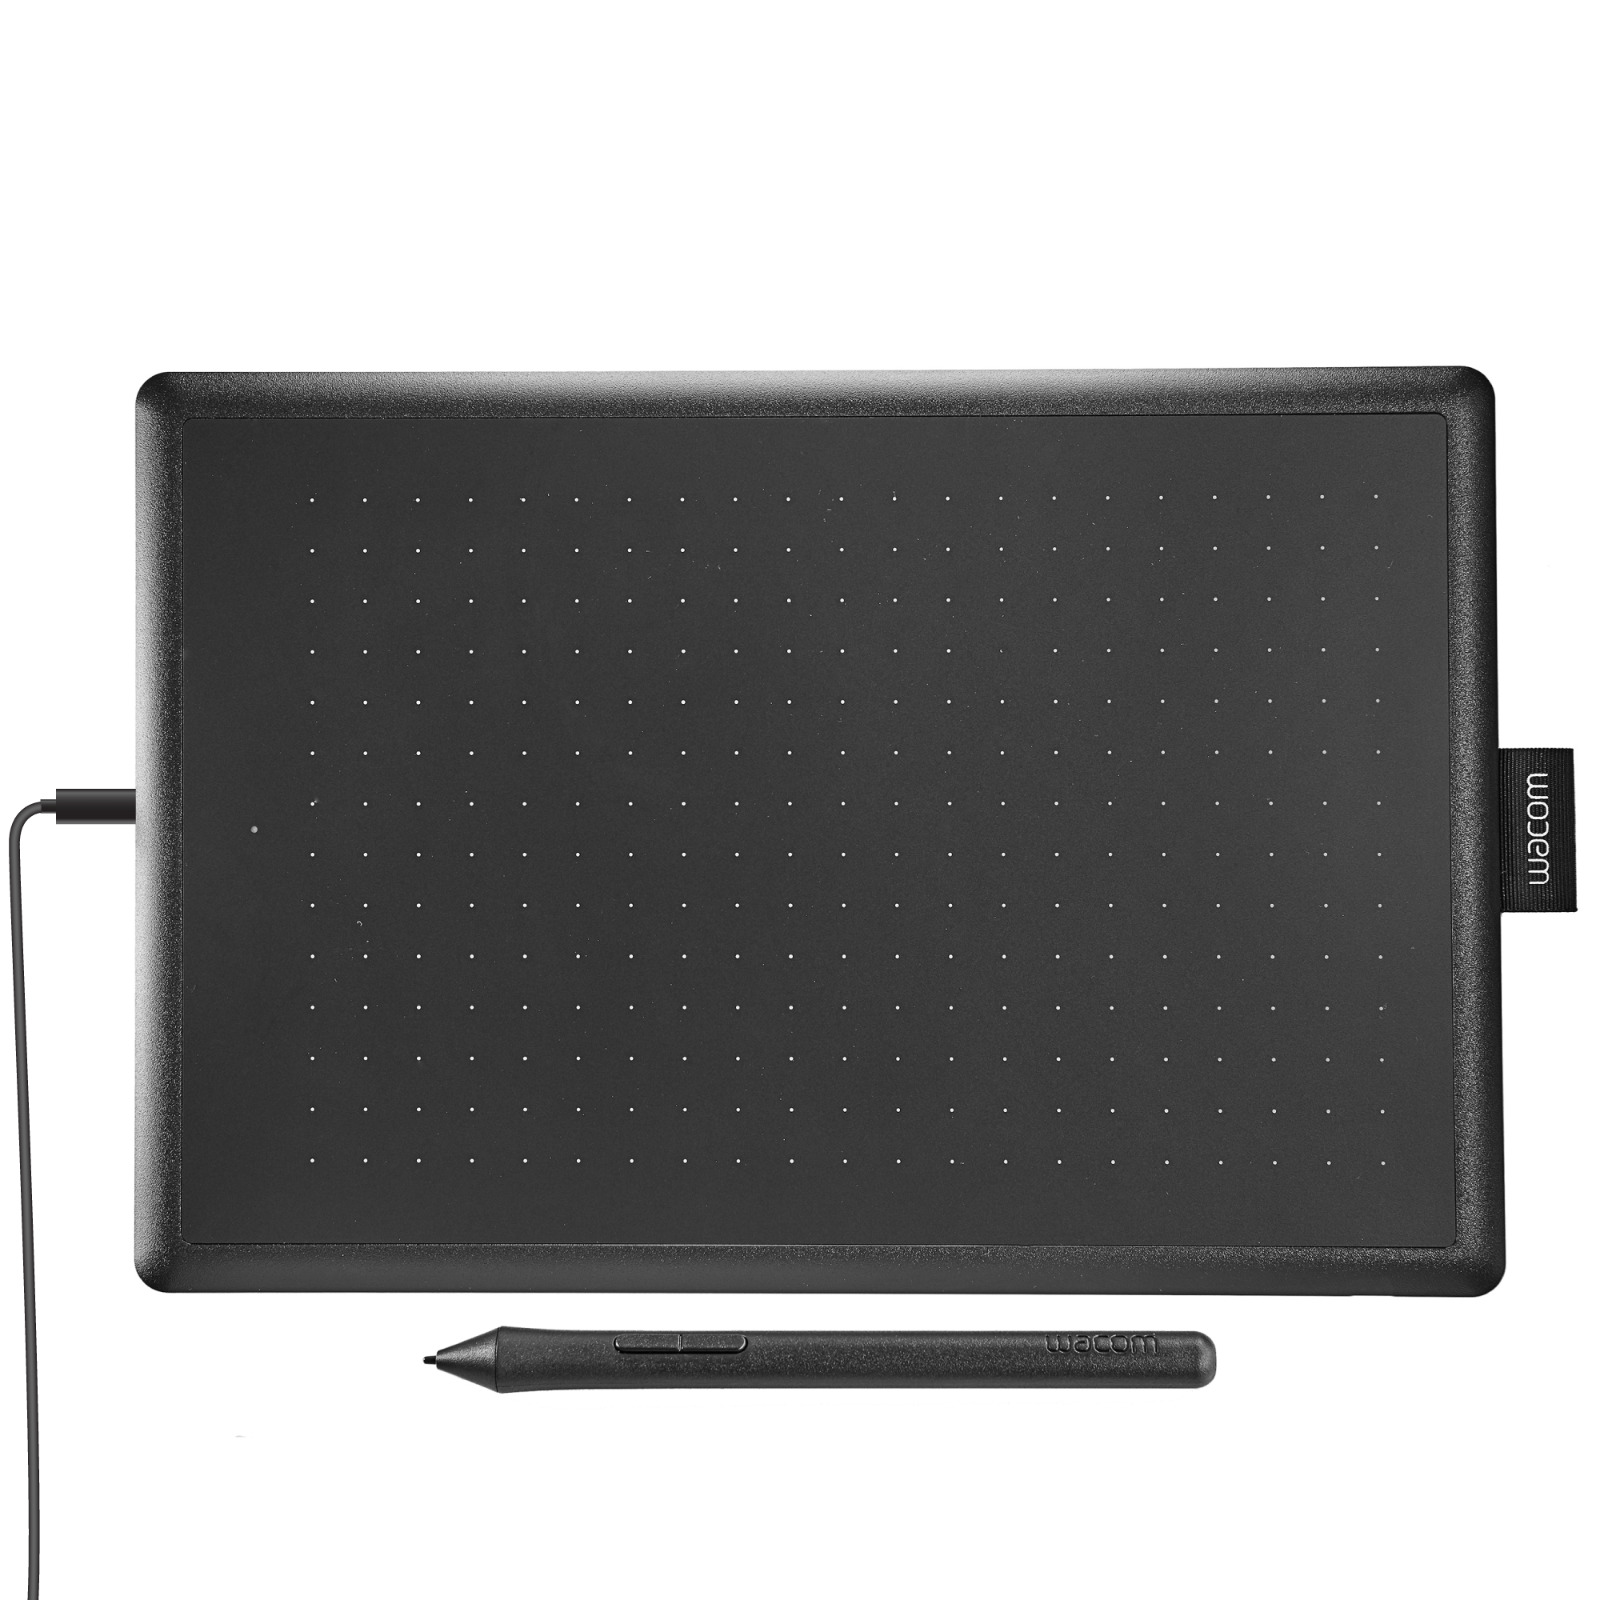 One by Wacom Medium Graphics Drawing Tablet, New